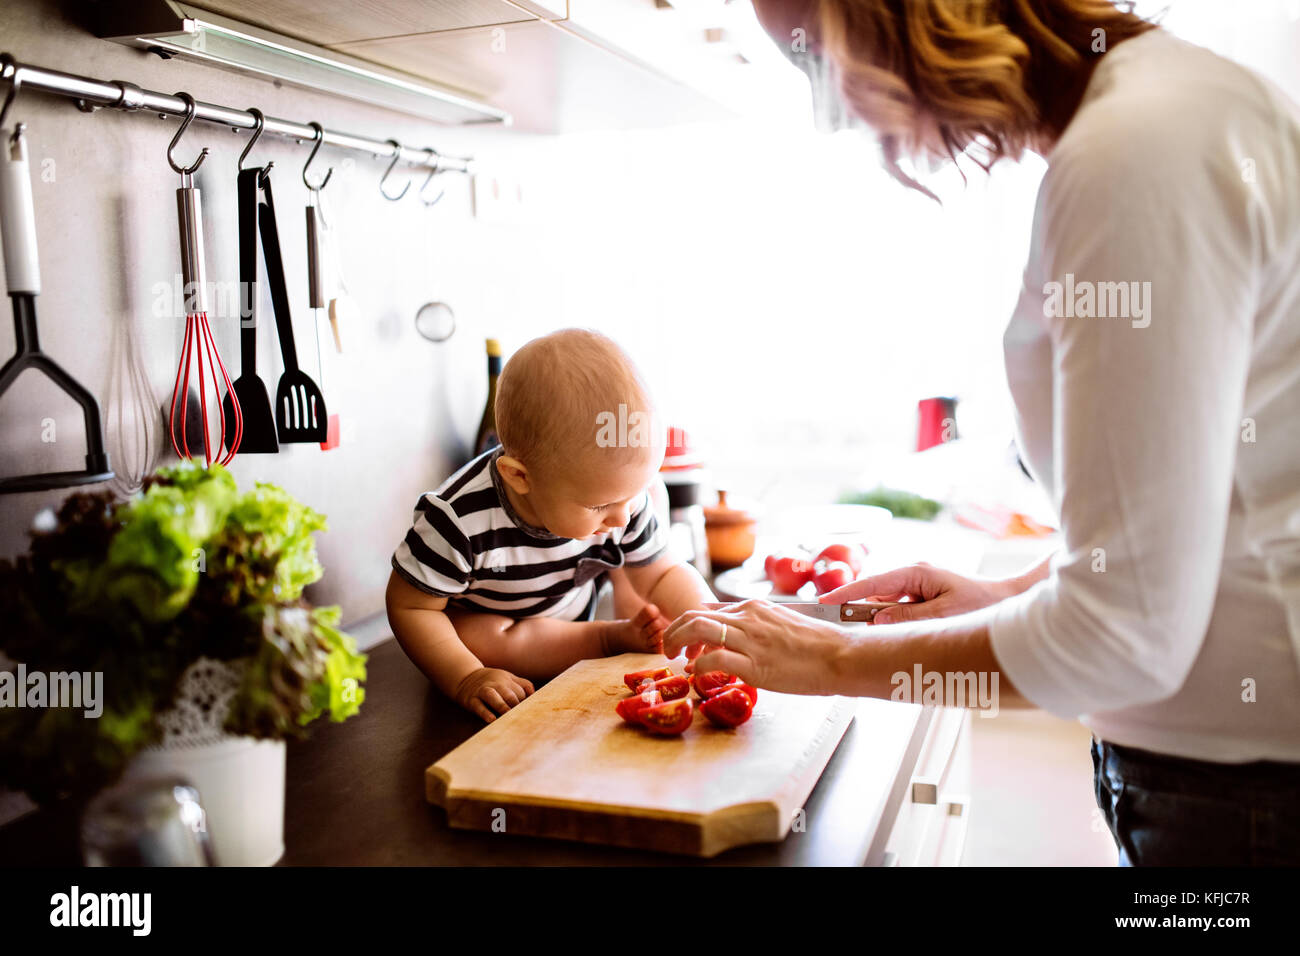 https://c8.alamy.com/comp/KFJC7R/young-mother-with-a-baby-boy-doing-housework-KFJC7R.jpg